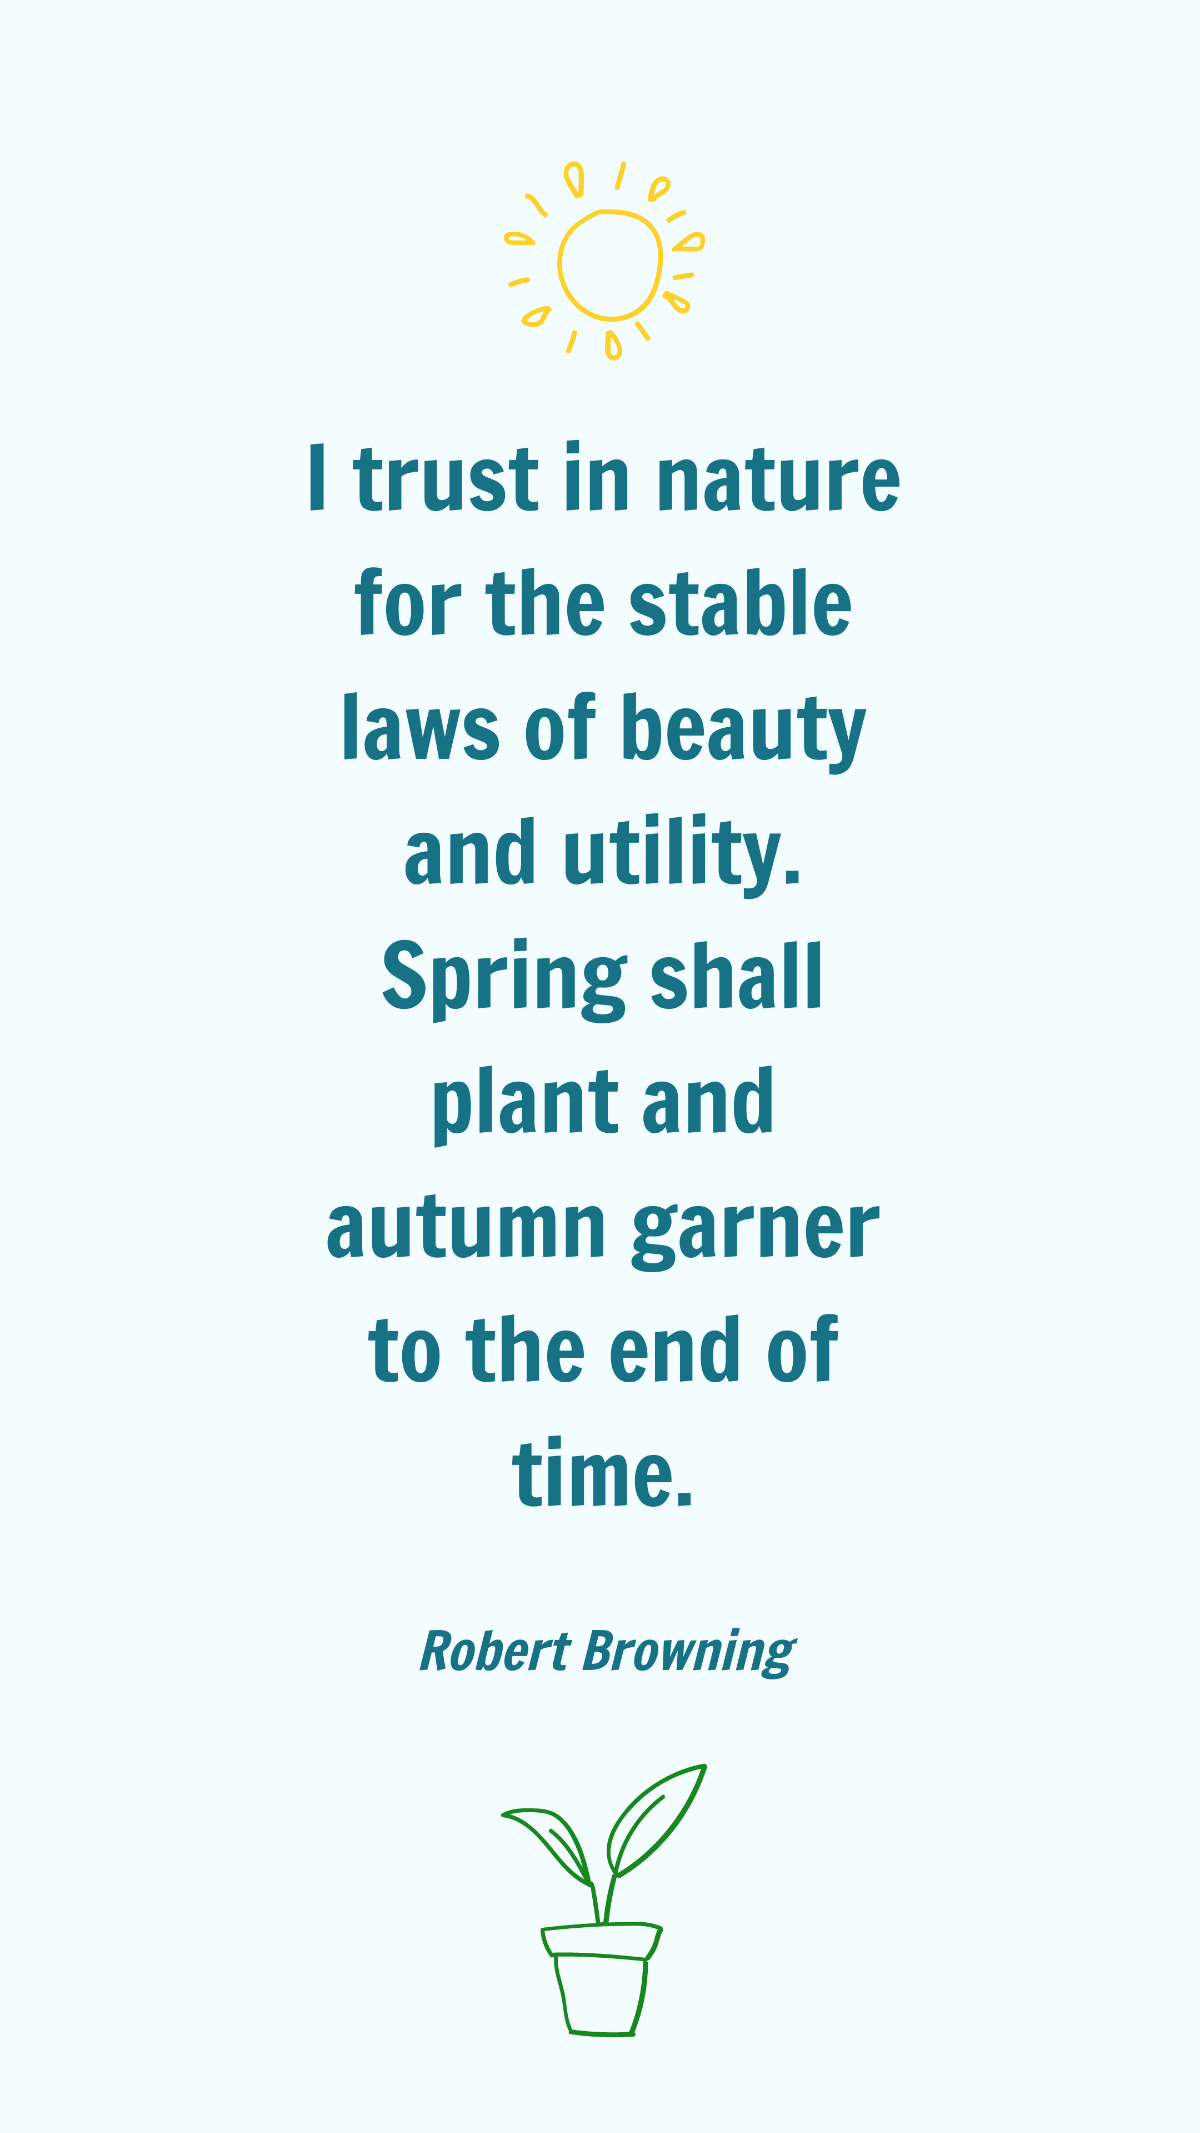 Robert Browning - I trust in nature for the stable laws of beauty and utility. Spring shall plant and autumn garner to the end of time. Template